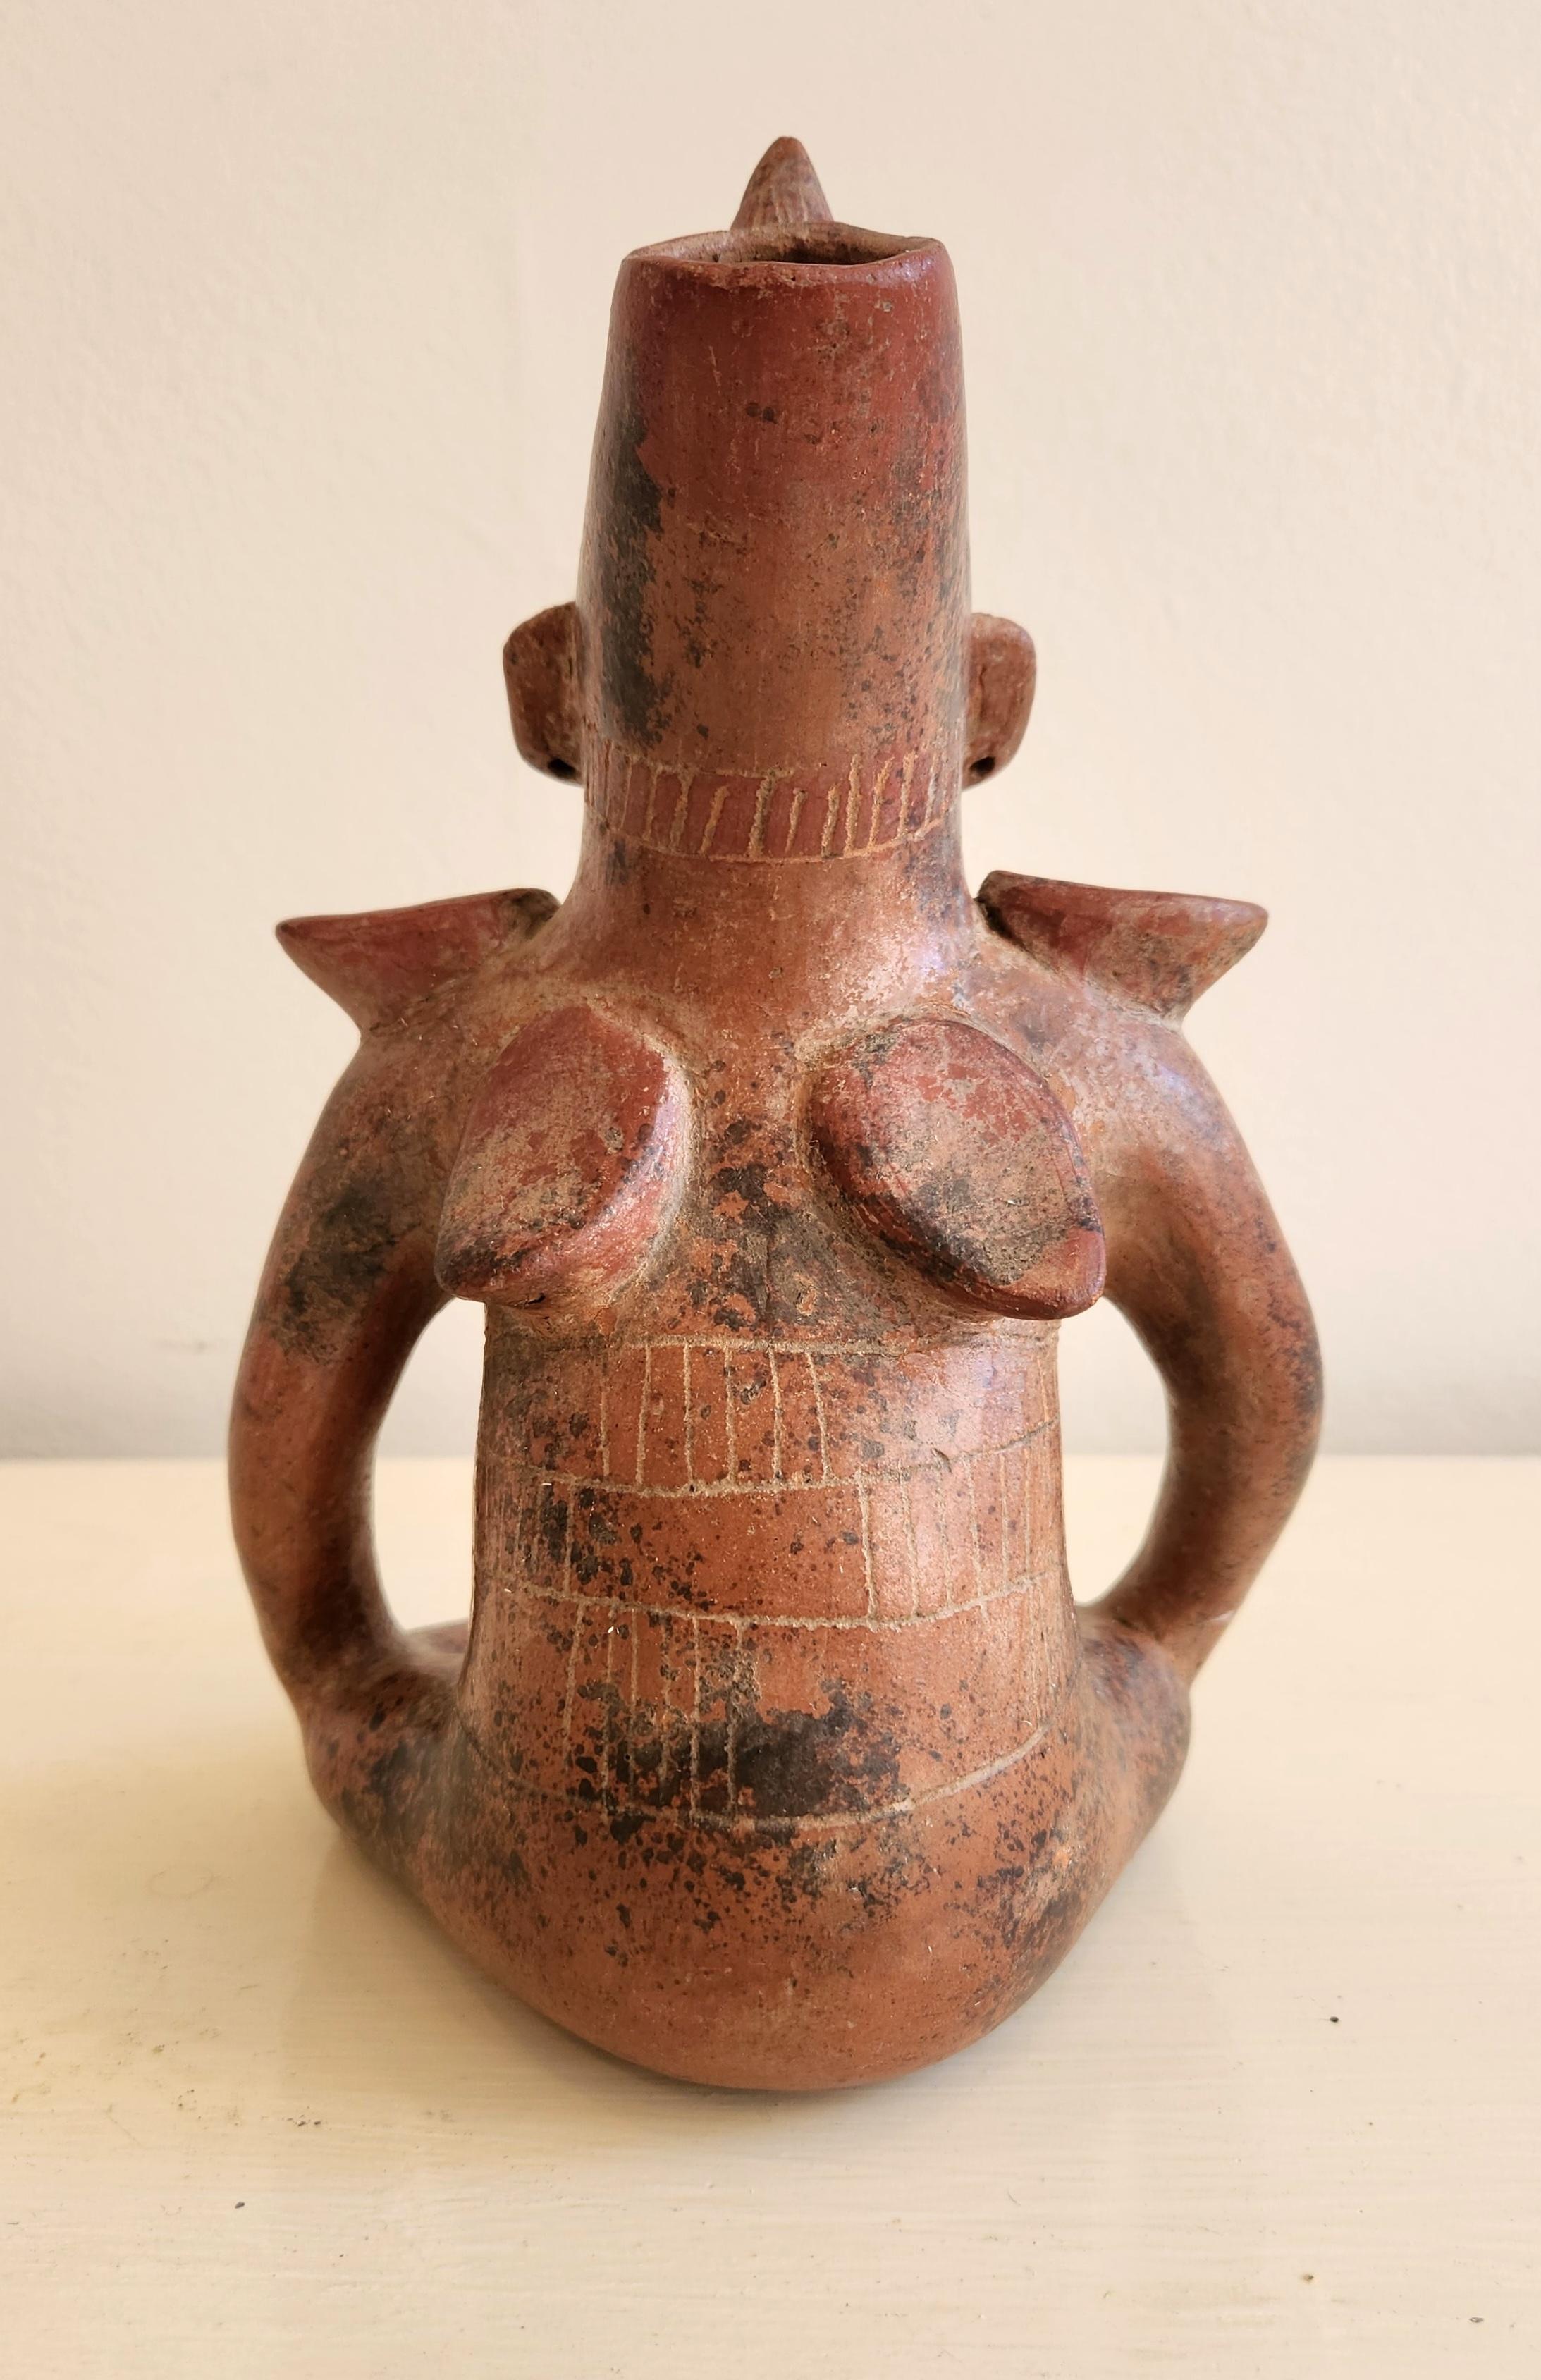 Clay Sculpture in Pre-Colombian Style Reproduction For Sale 2